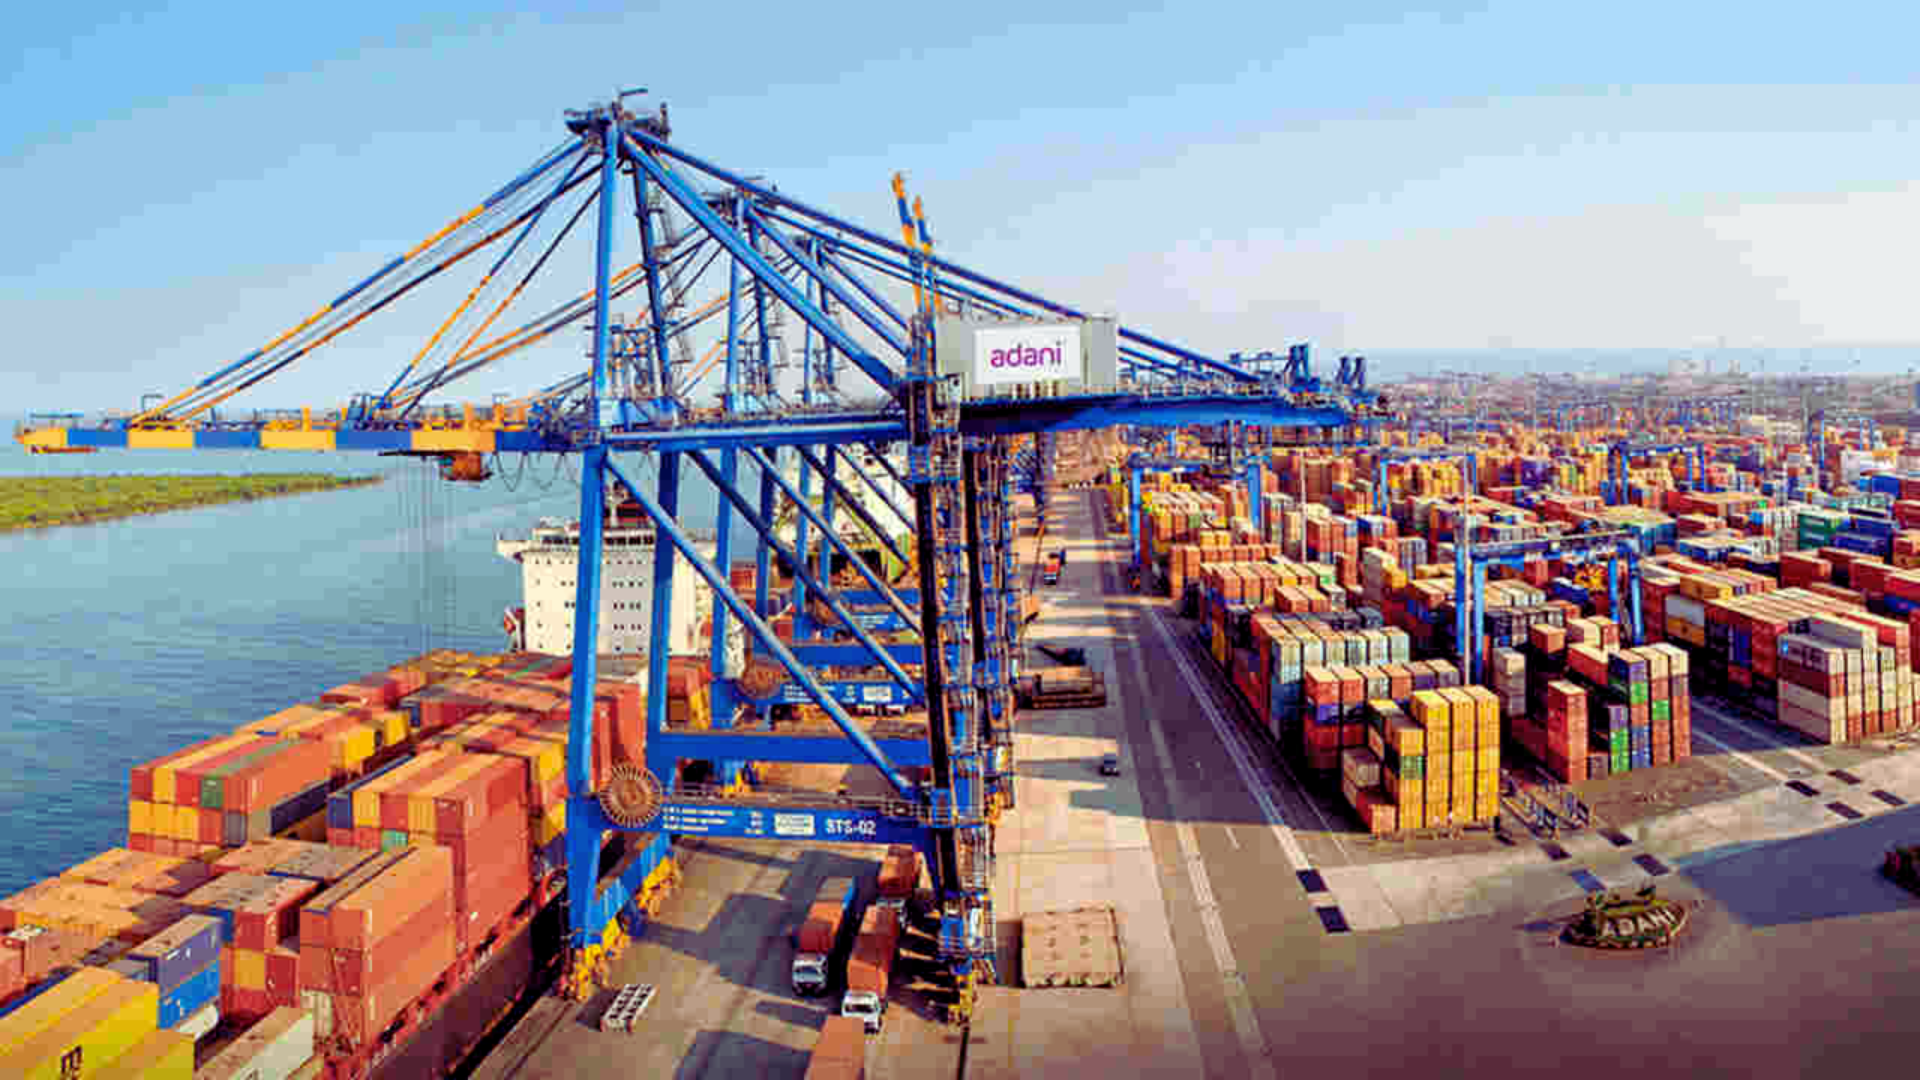 Adani Ports Expands East Coast Footprint with Acquisition of Gopalpur Port in Odisha _AMF NEWS